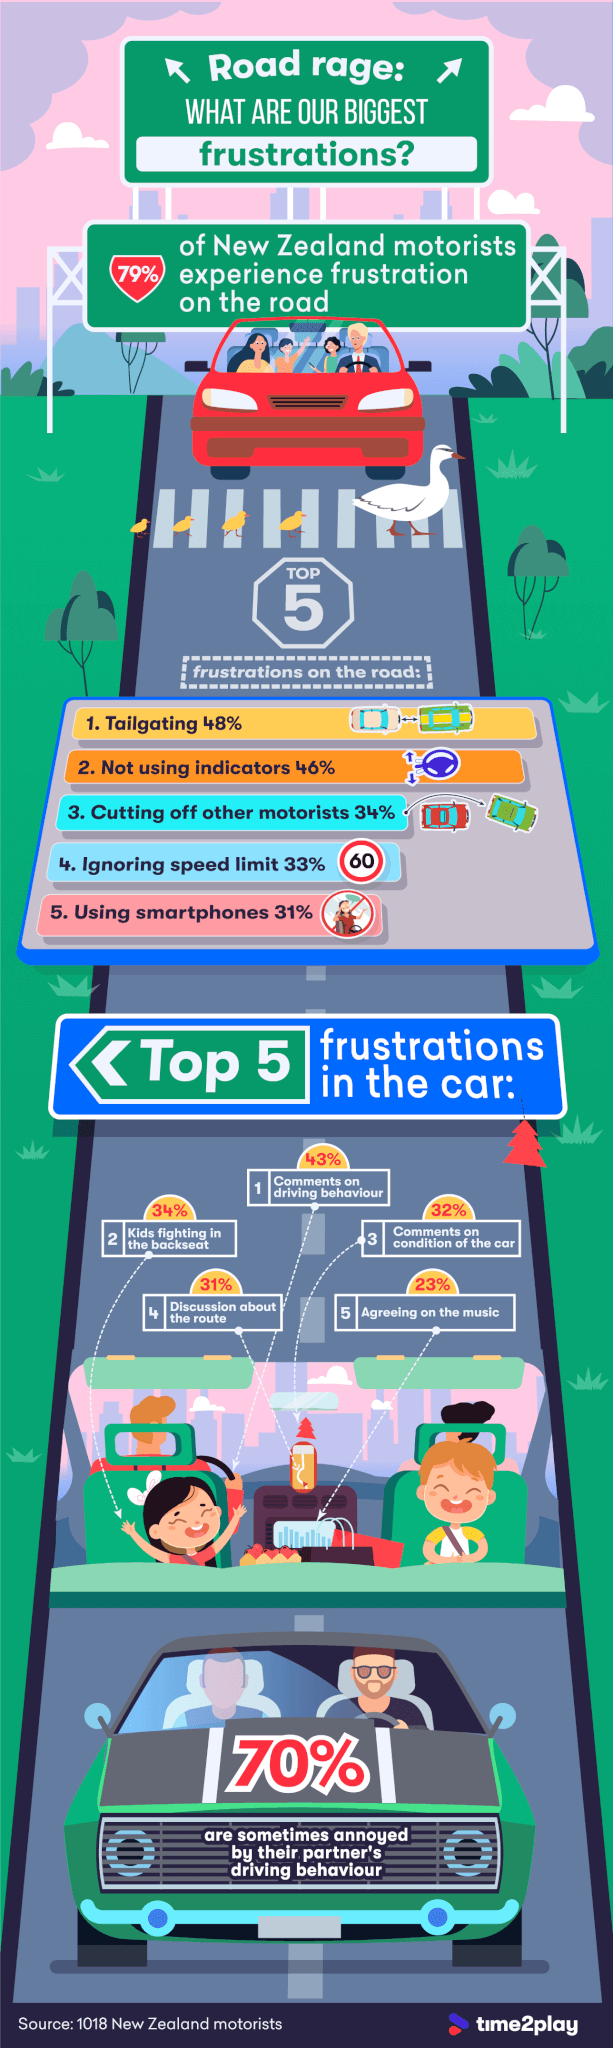 Car Frustrations infographic Nz